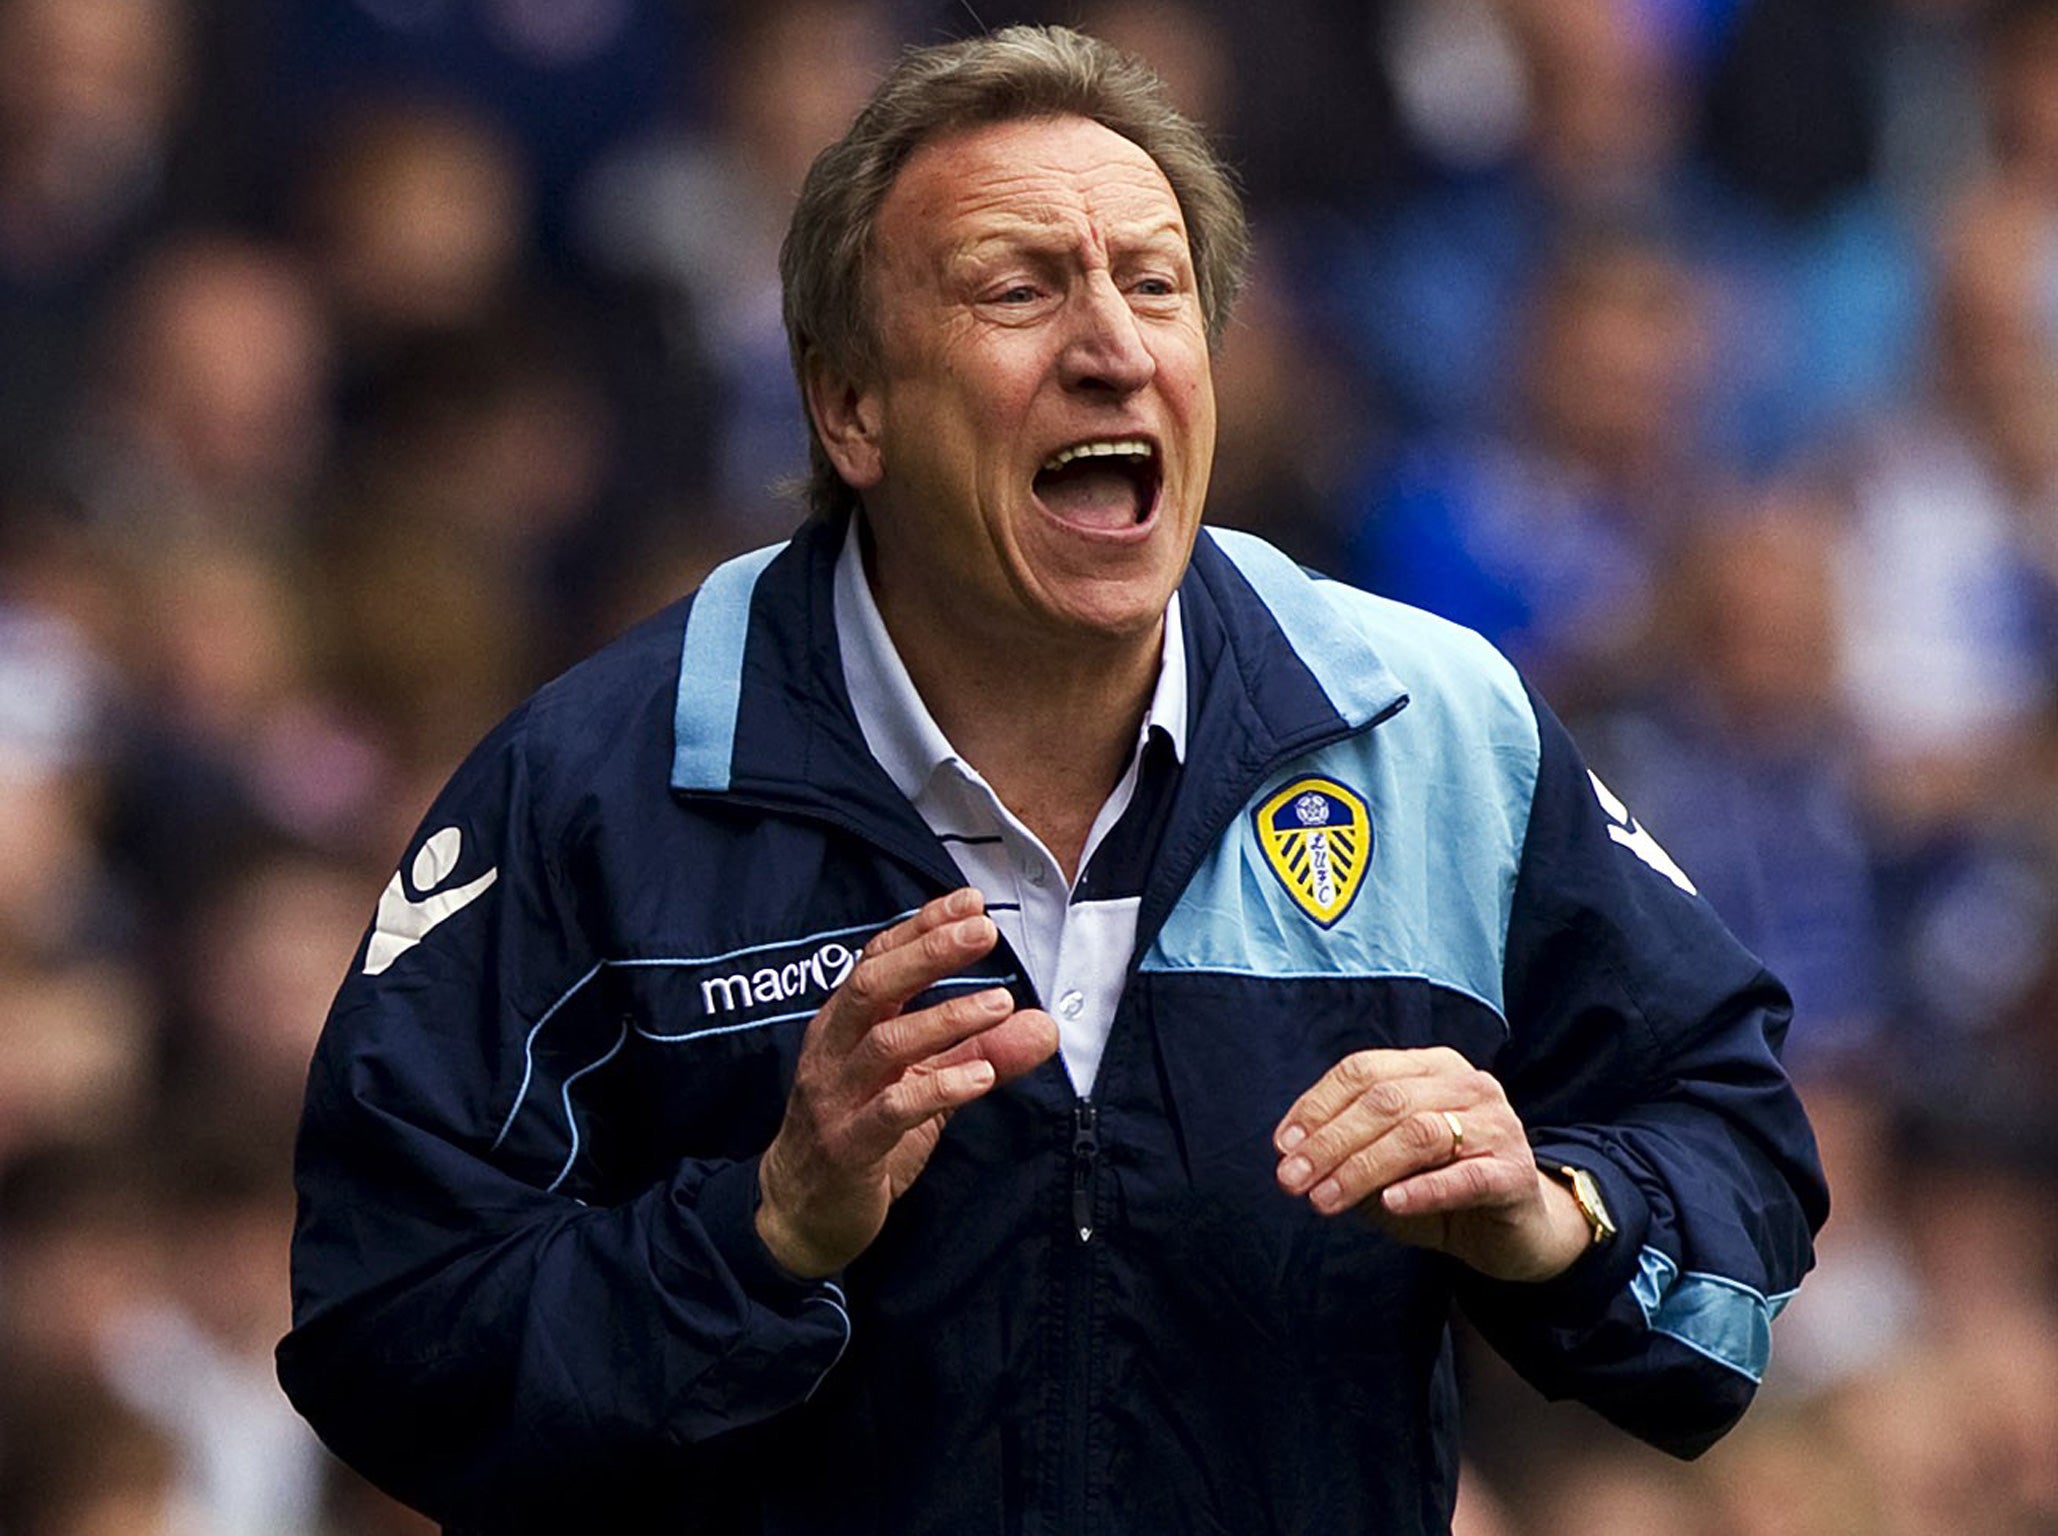 Neil Warnock took over this year